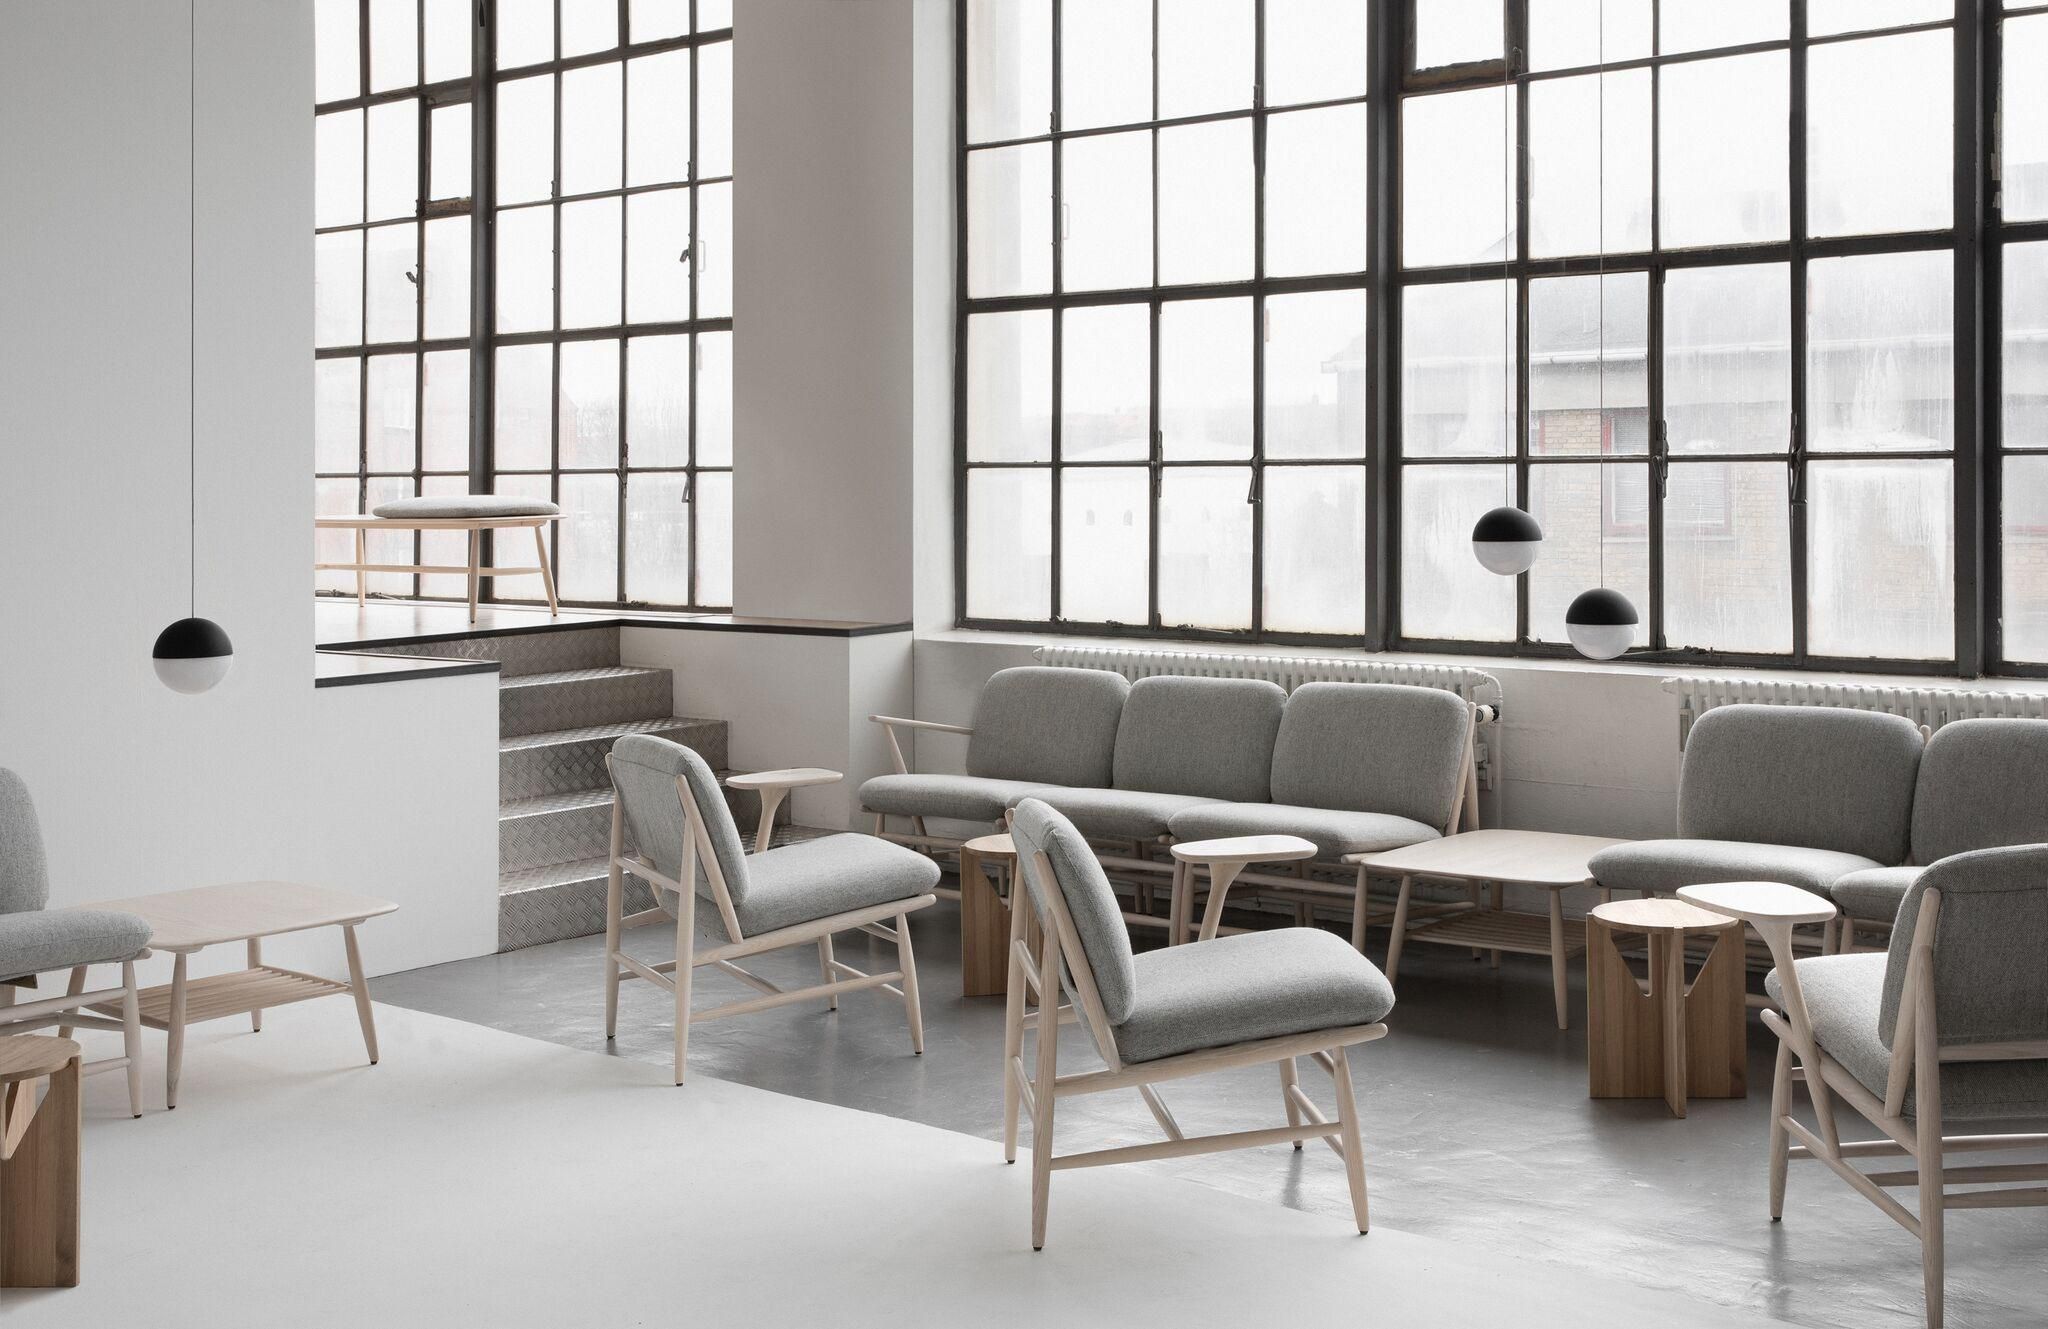 ercol to launch new collection in collaboration with Norm Architects